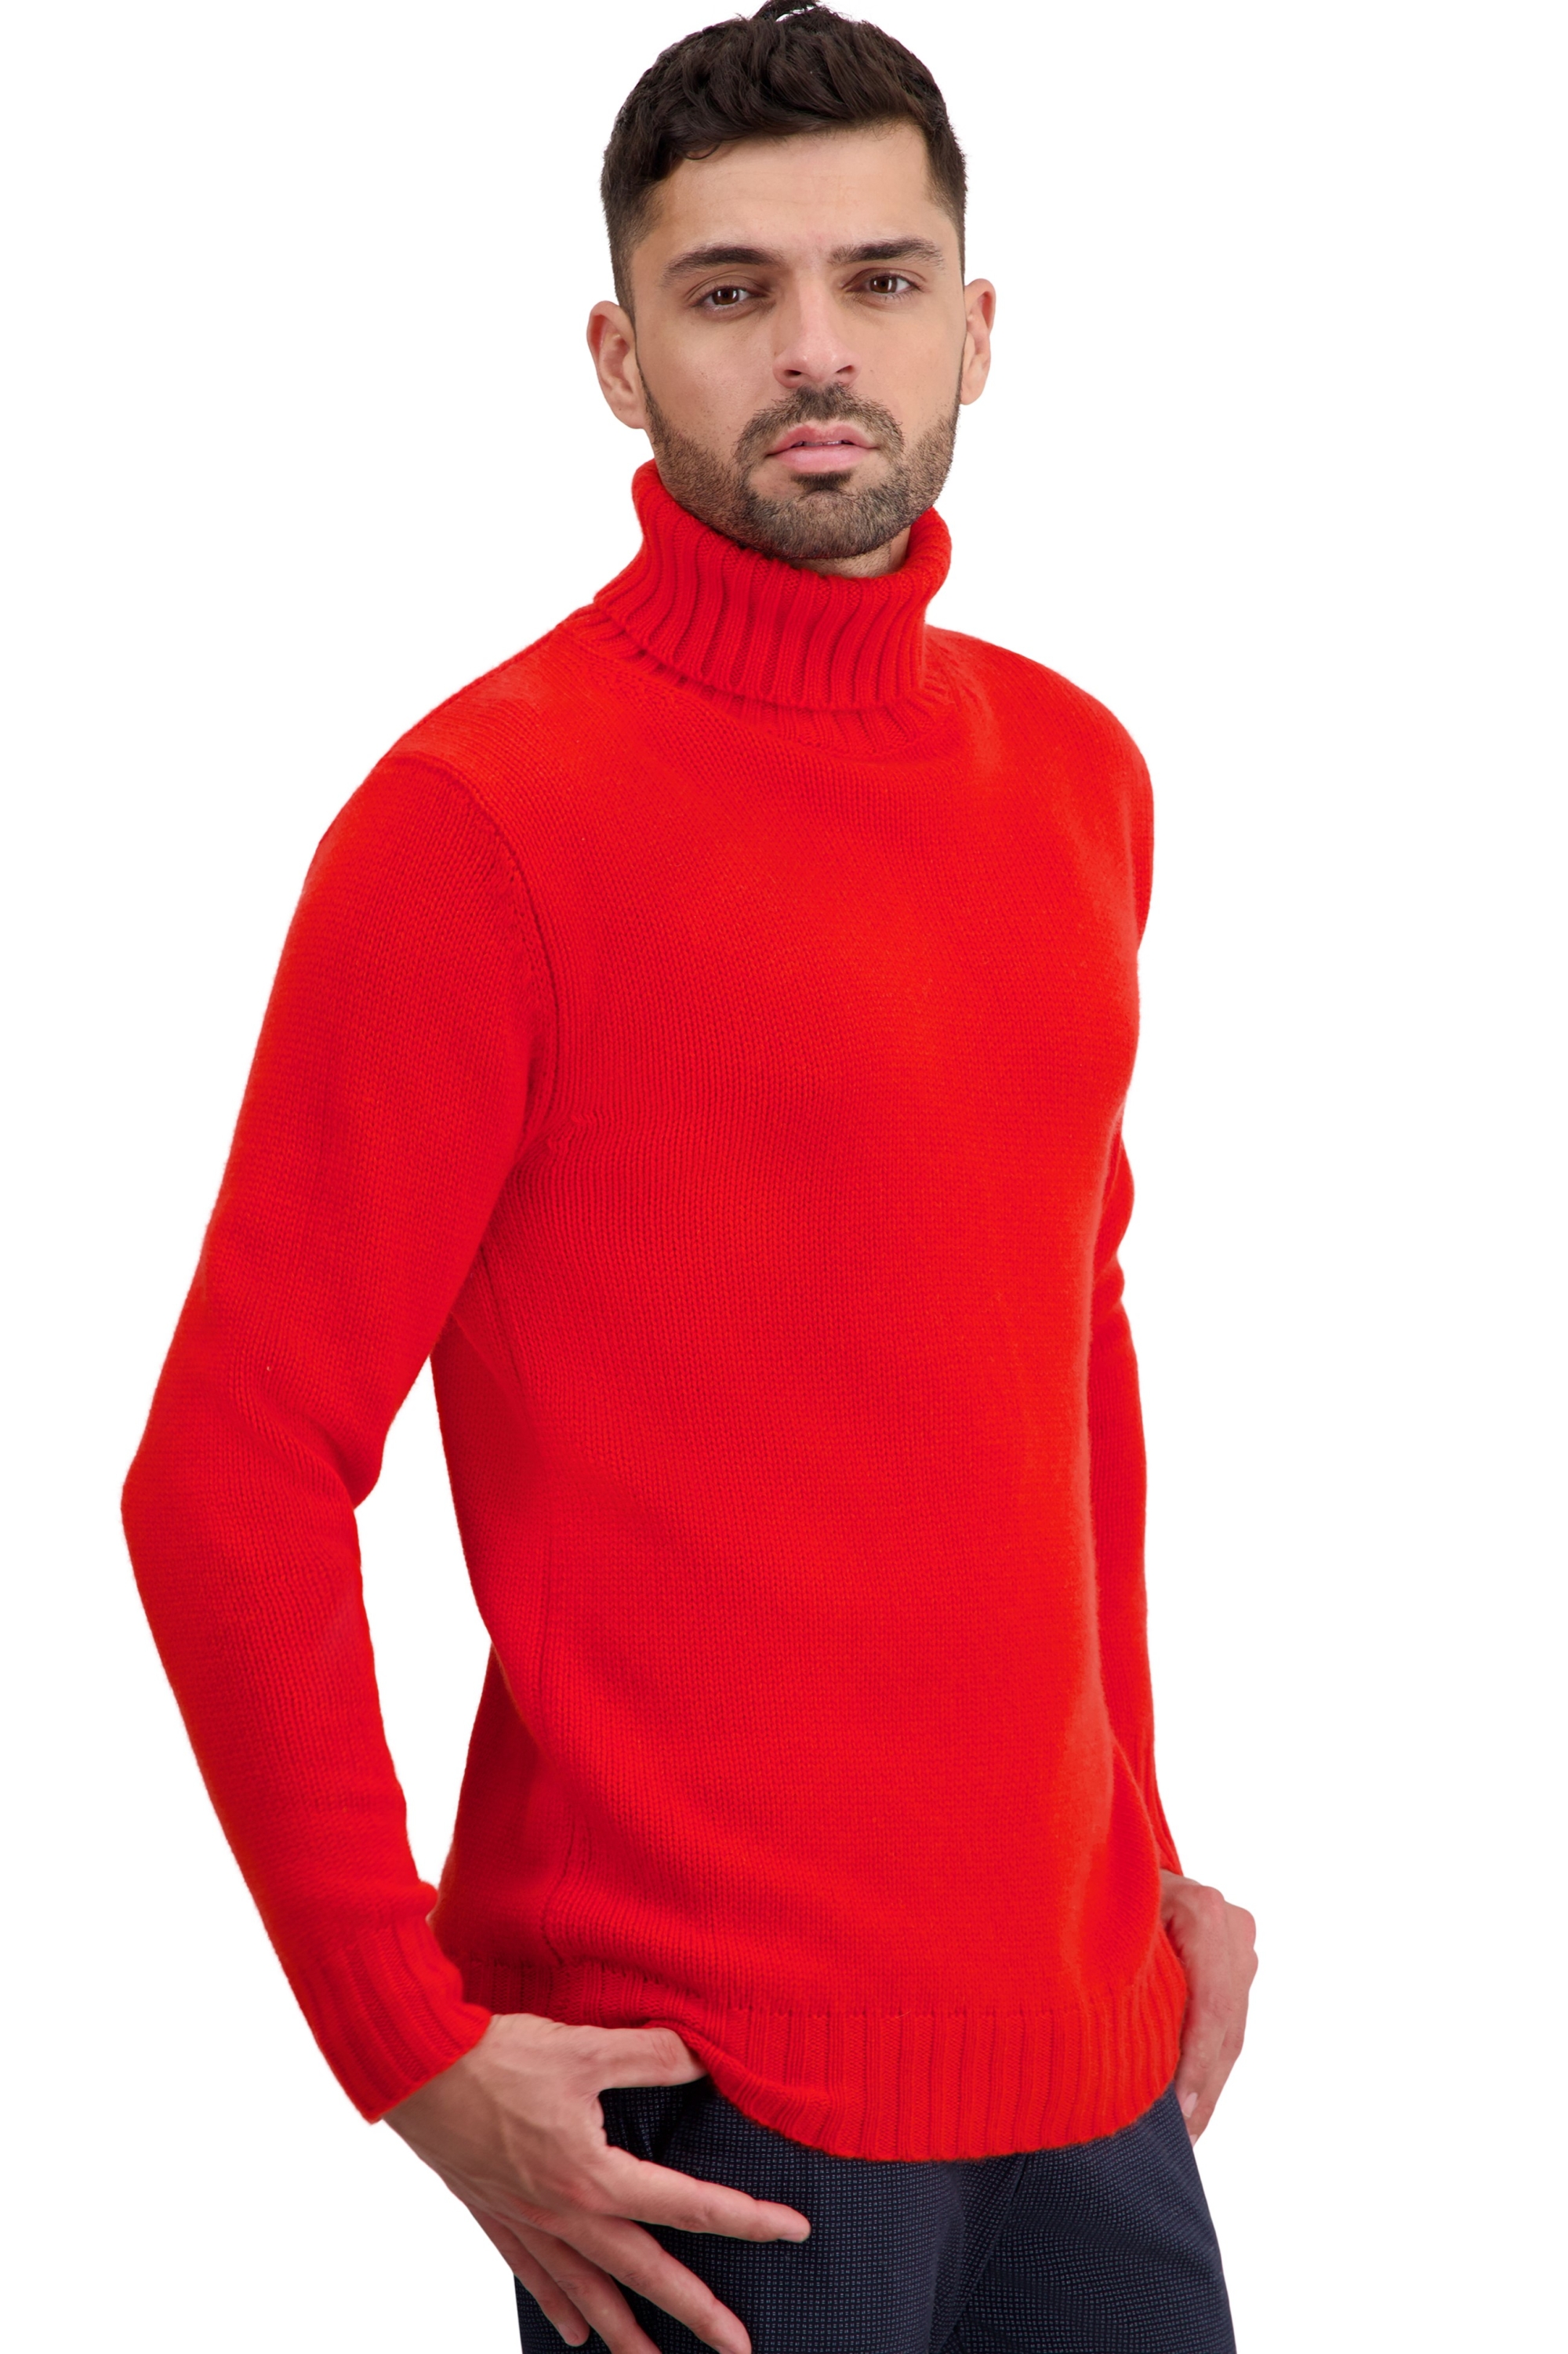 Cashmere men basic sweaters at low prices tobago first tomato xl